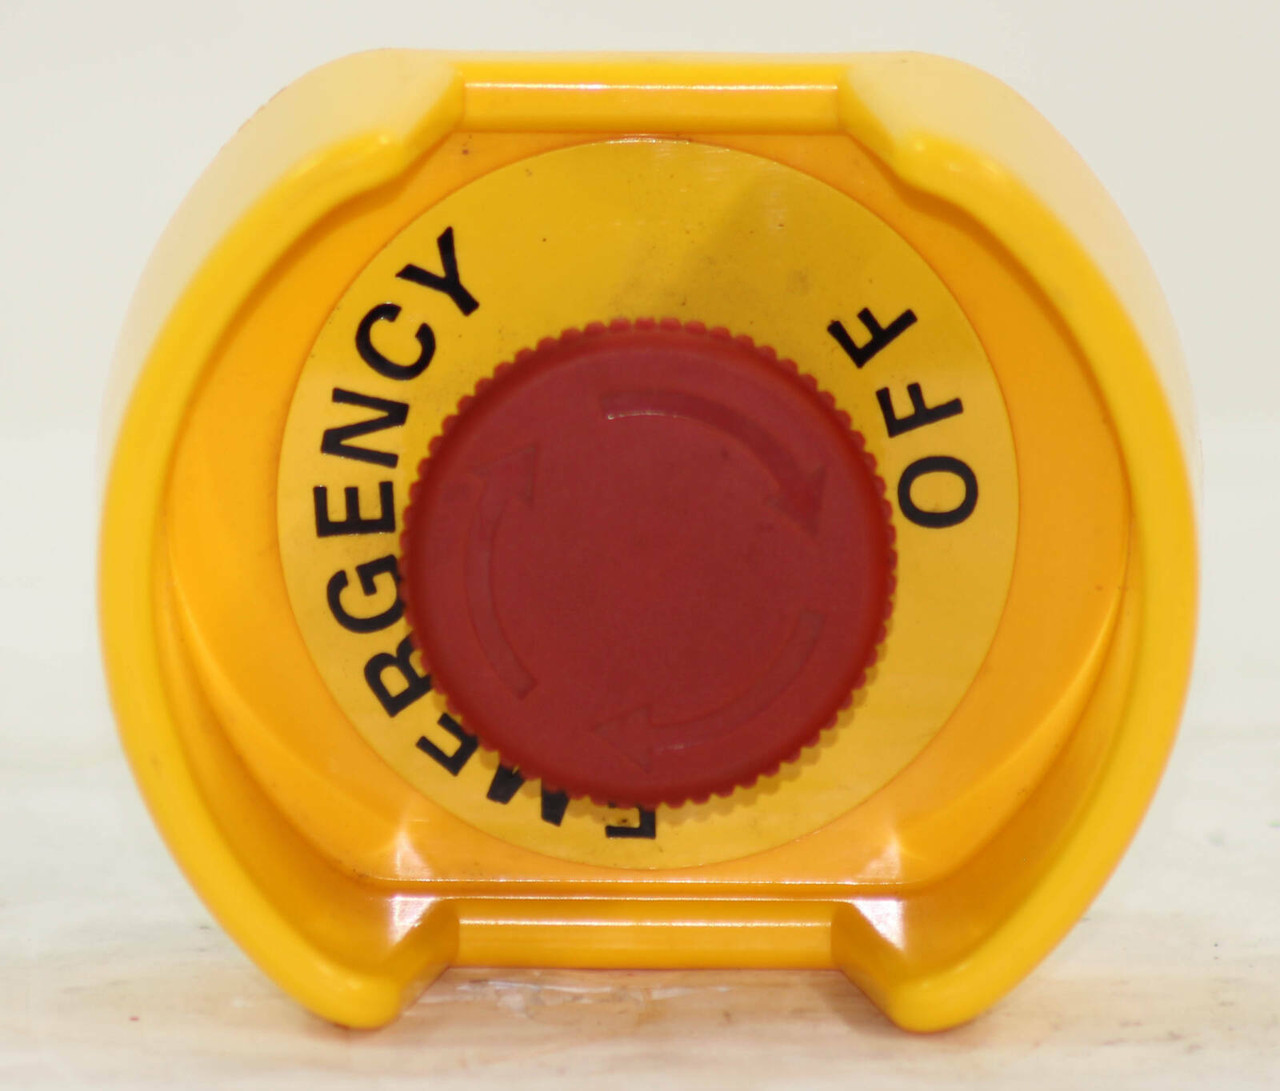 Omron A22E Pushbutton Color: Yellow Cover, Red Button Emergency Pushbutton Inside A22Z-EG1 Switch Case